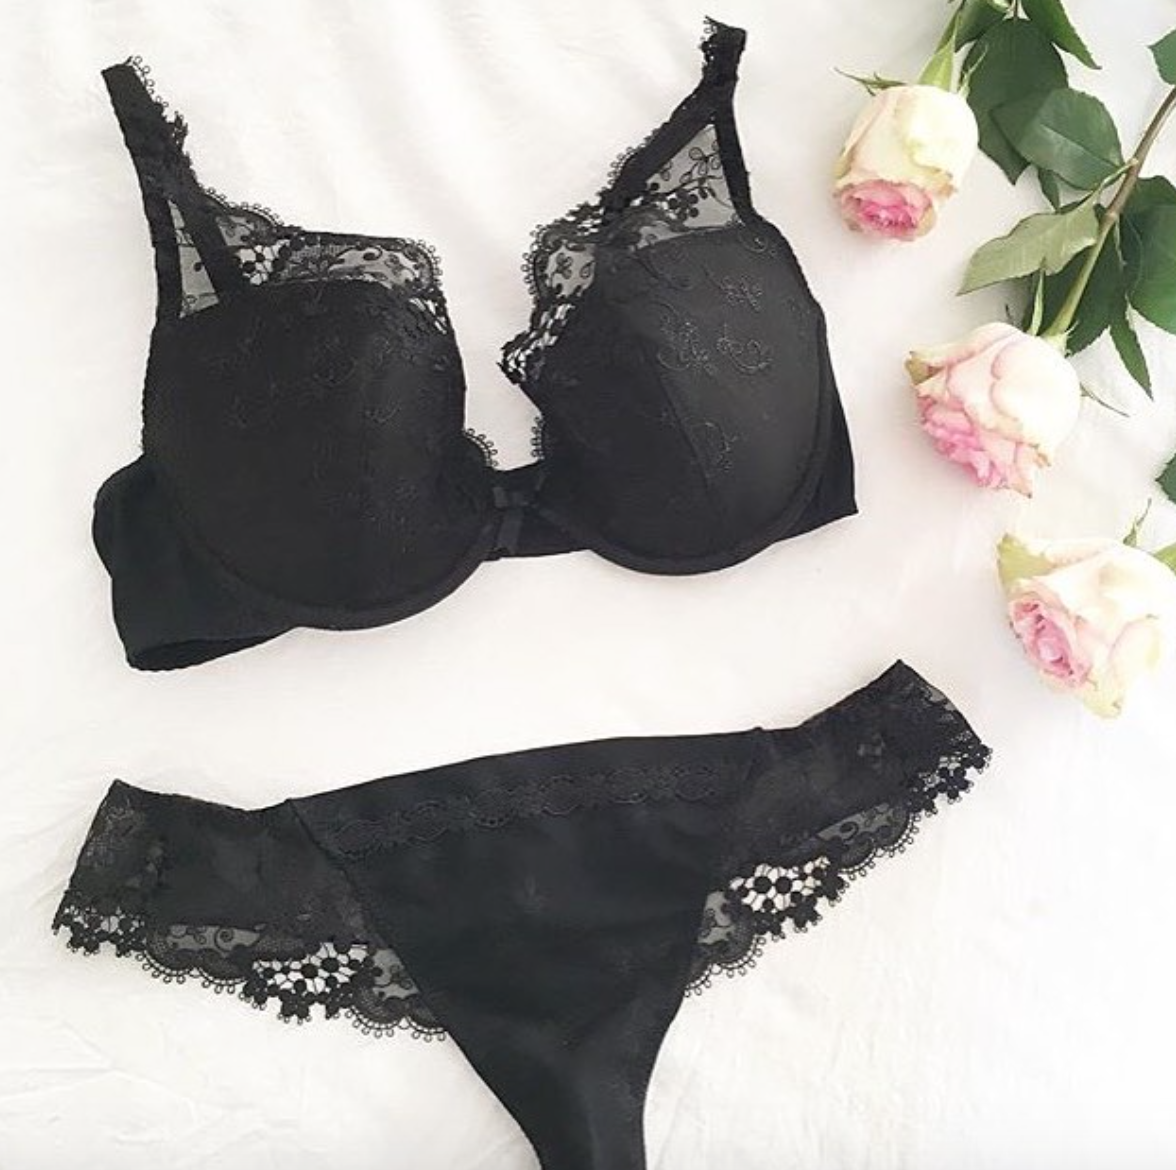 how-to-find-your-right-bra-size-and-shape